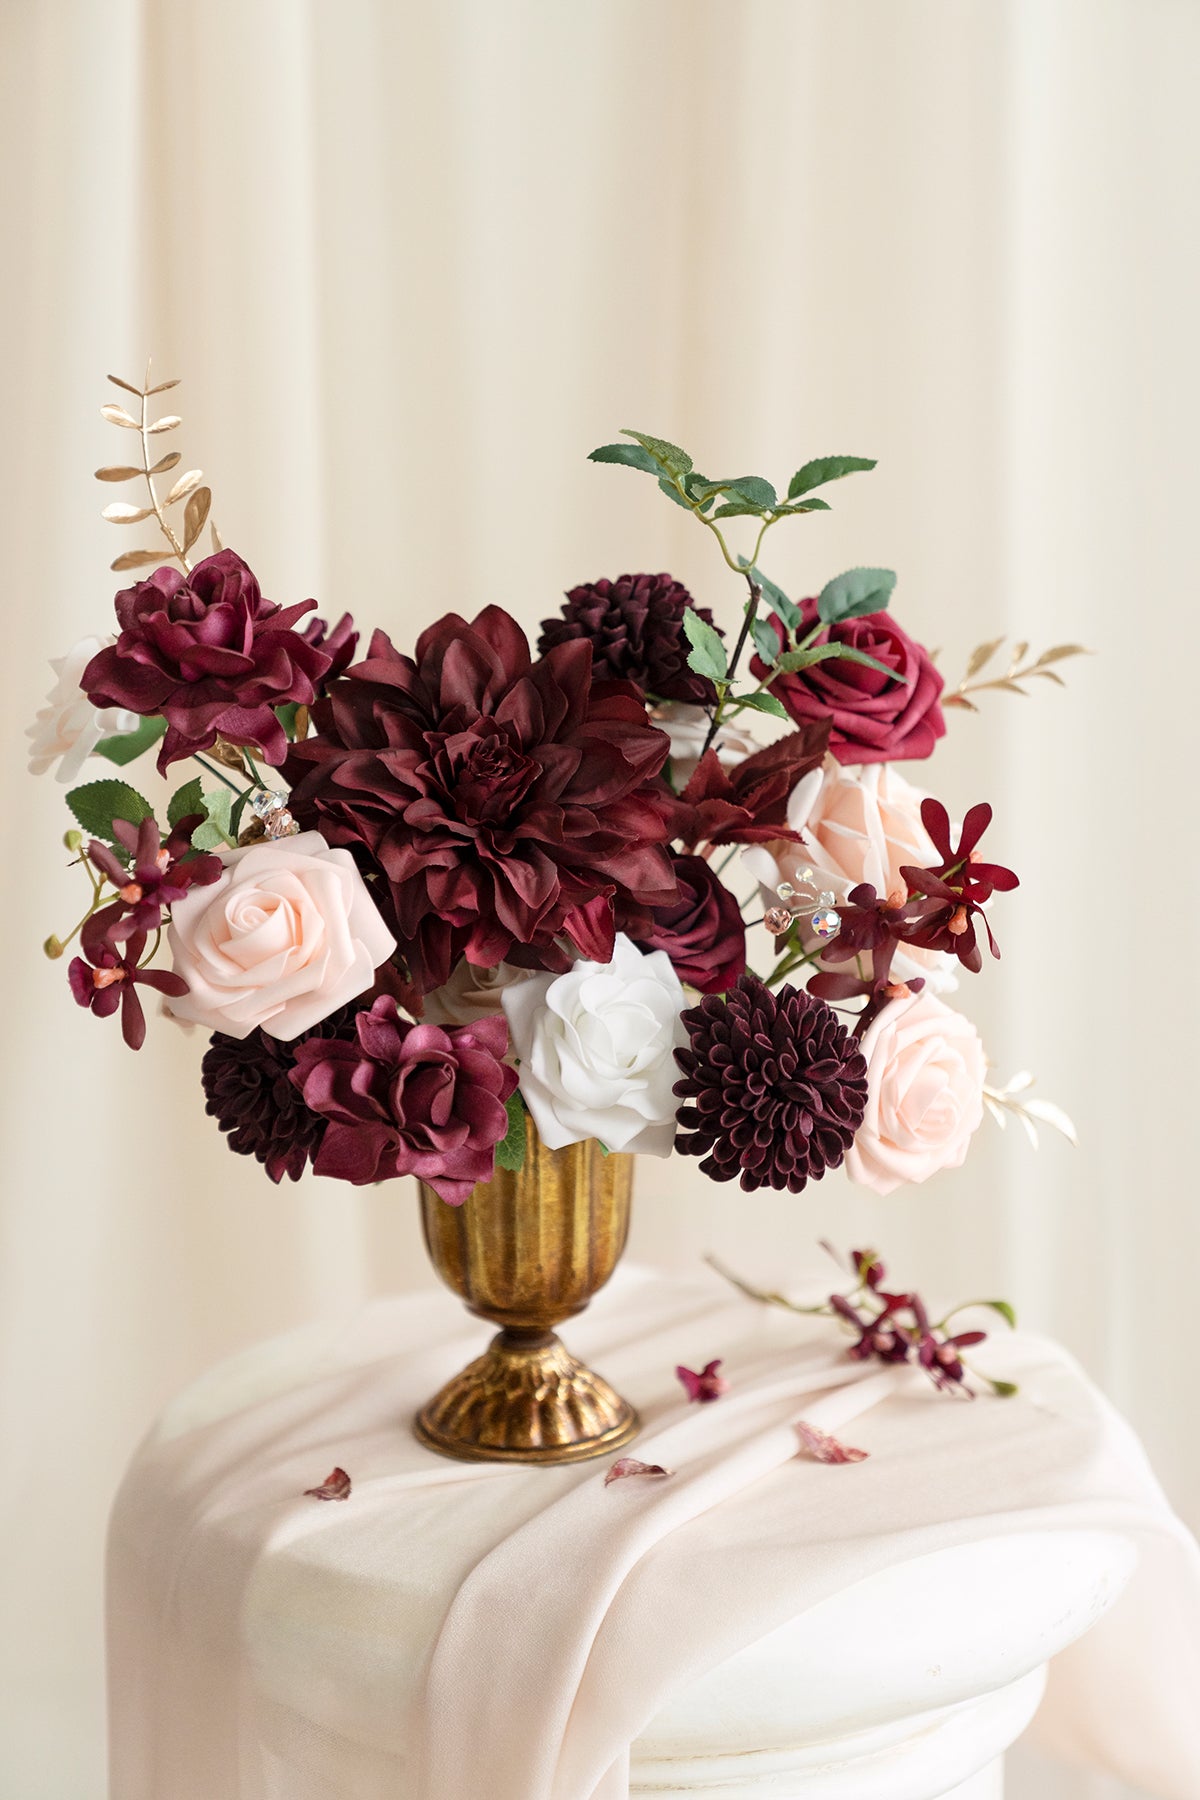 12 Ideas to Decorate with Artificial Flowers in Winter - Saffron's